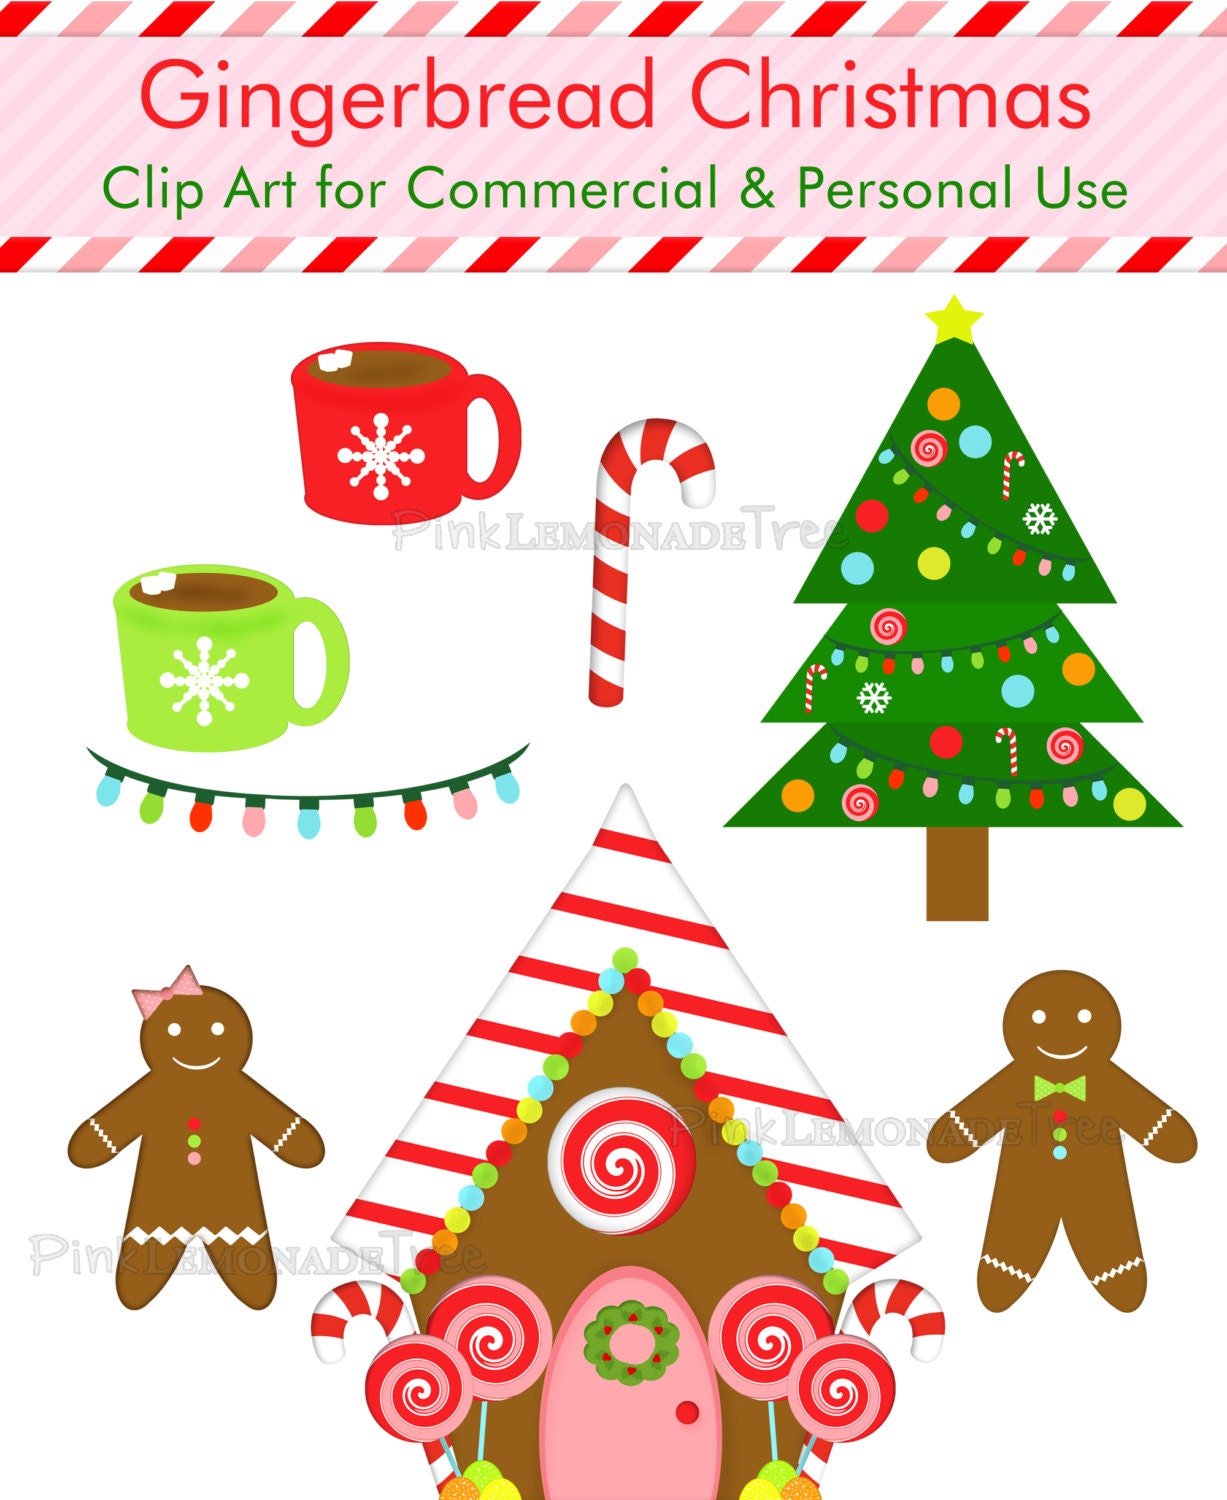 clip art gingerbread house free - photo #36